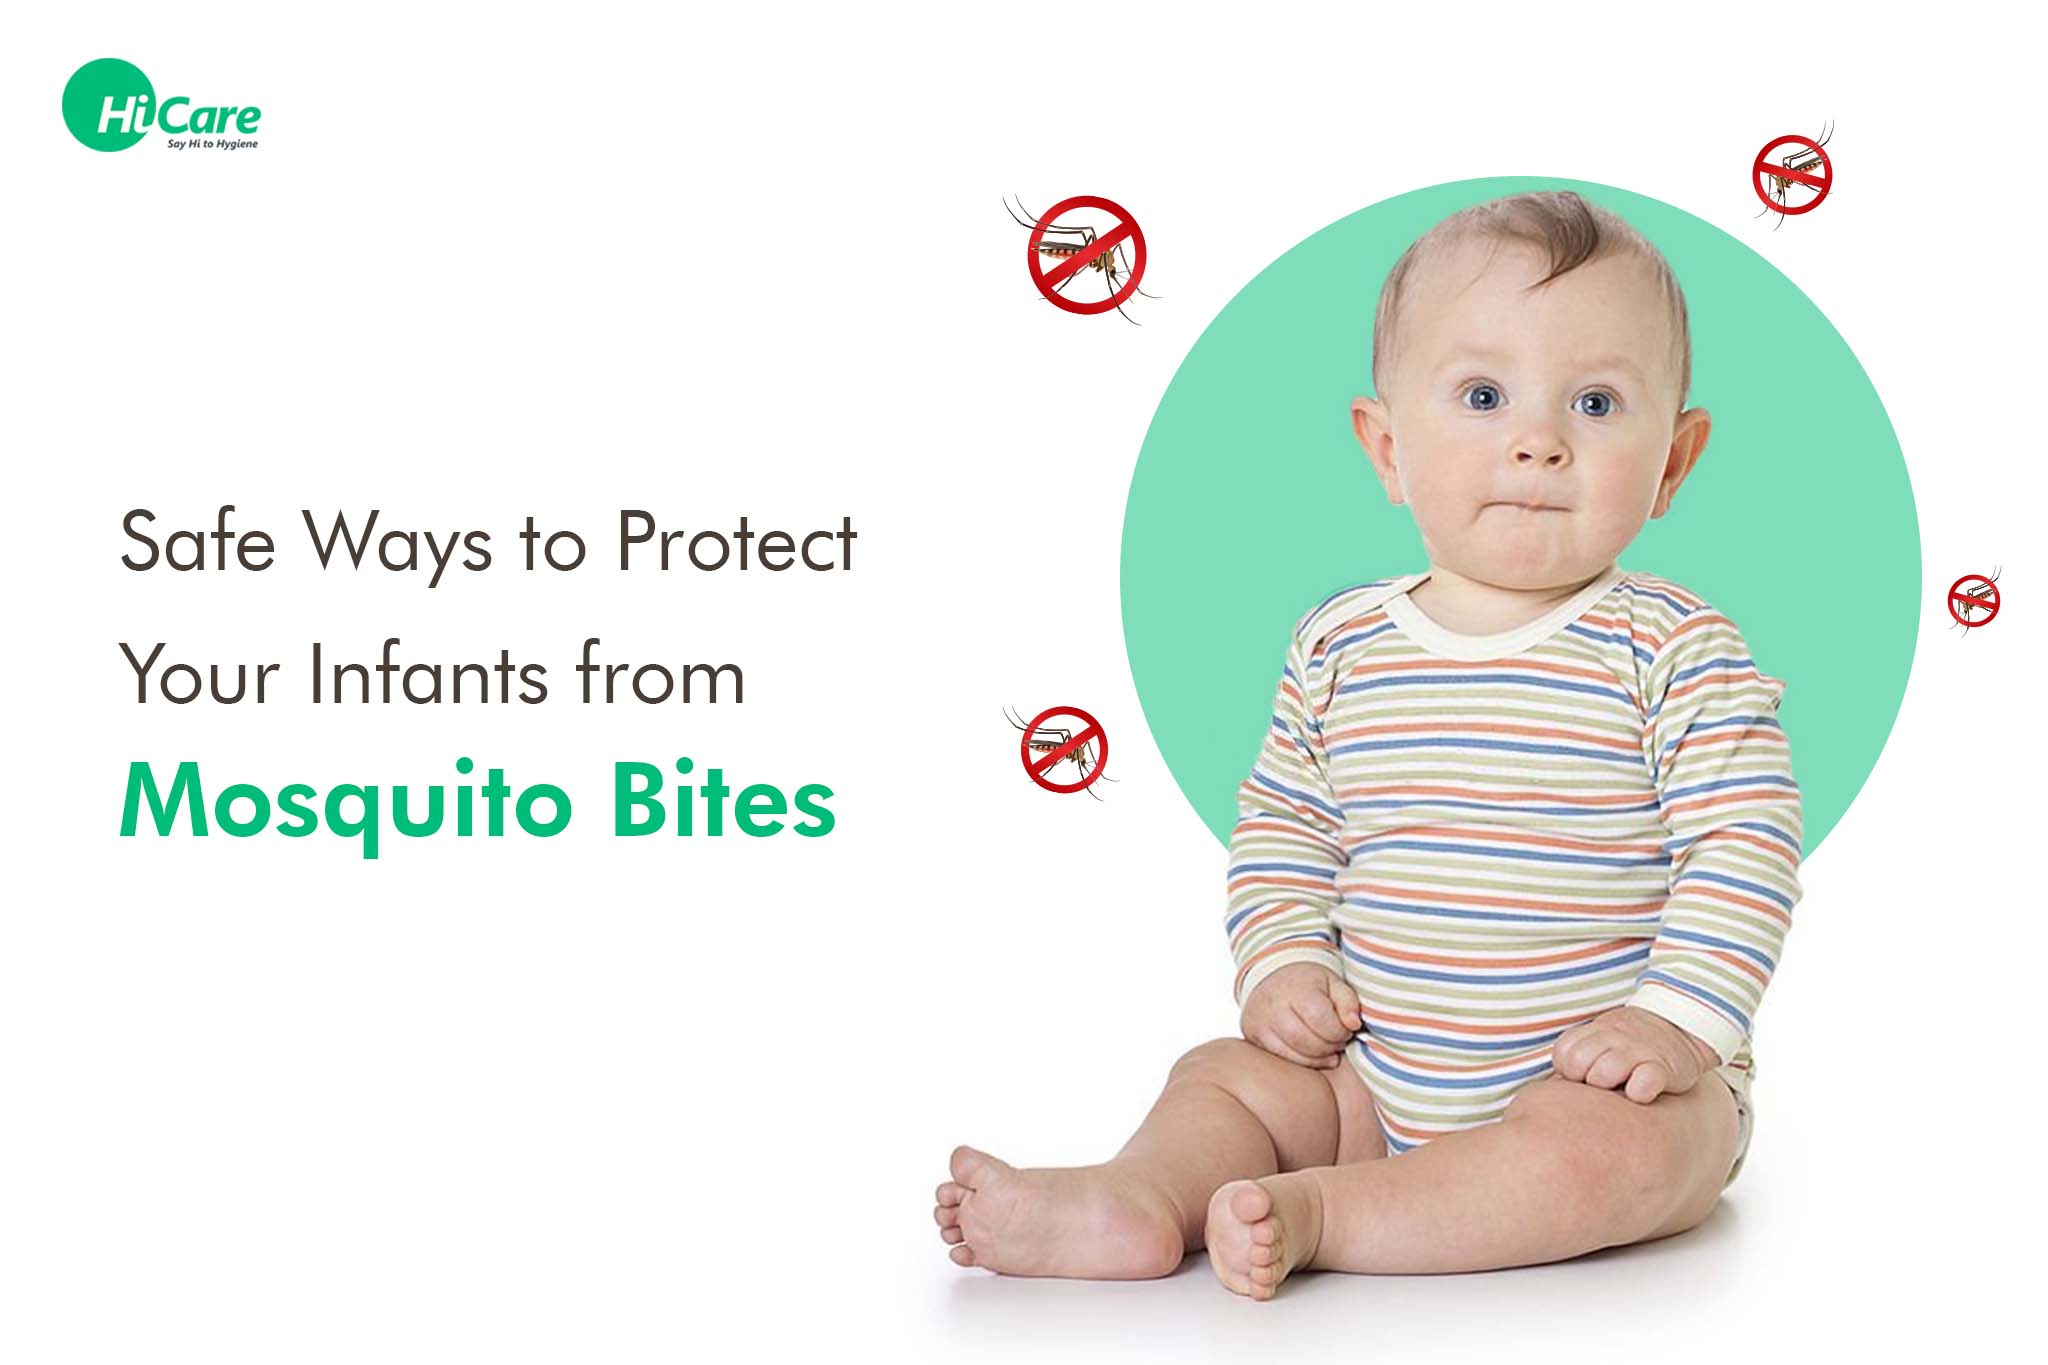 6 Safe Ways to Protect Your Infants from Mosquito Bites